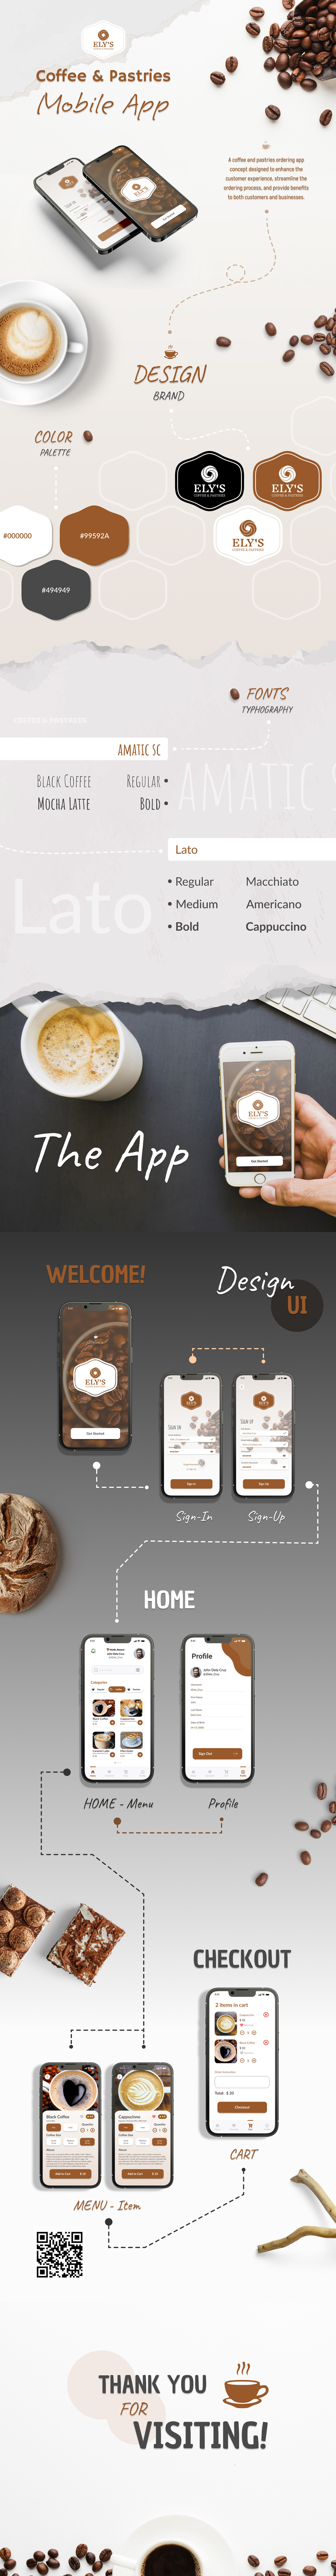 mobile app design UI/UX Figma Mobile app application Ecommerce Coffee coffeeshop food and beverage